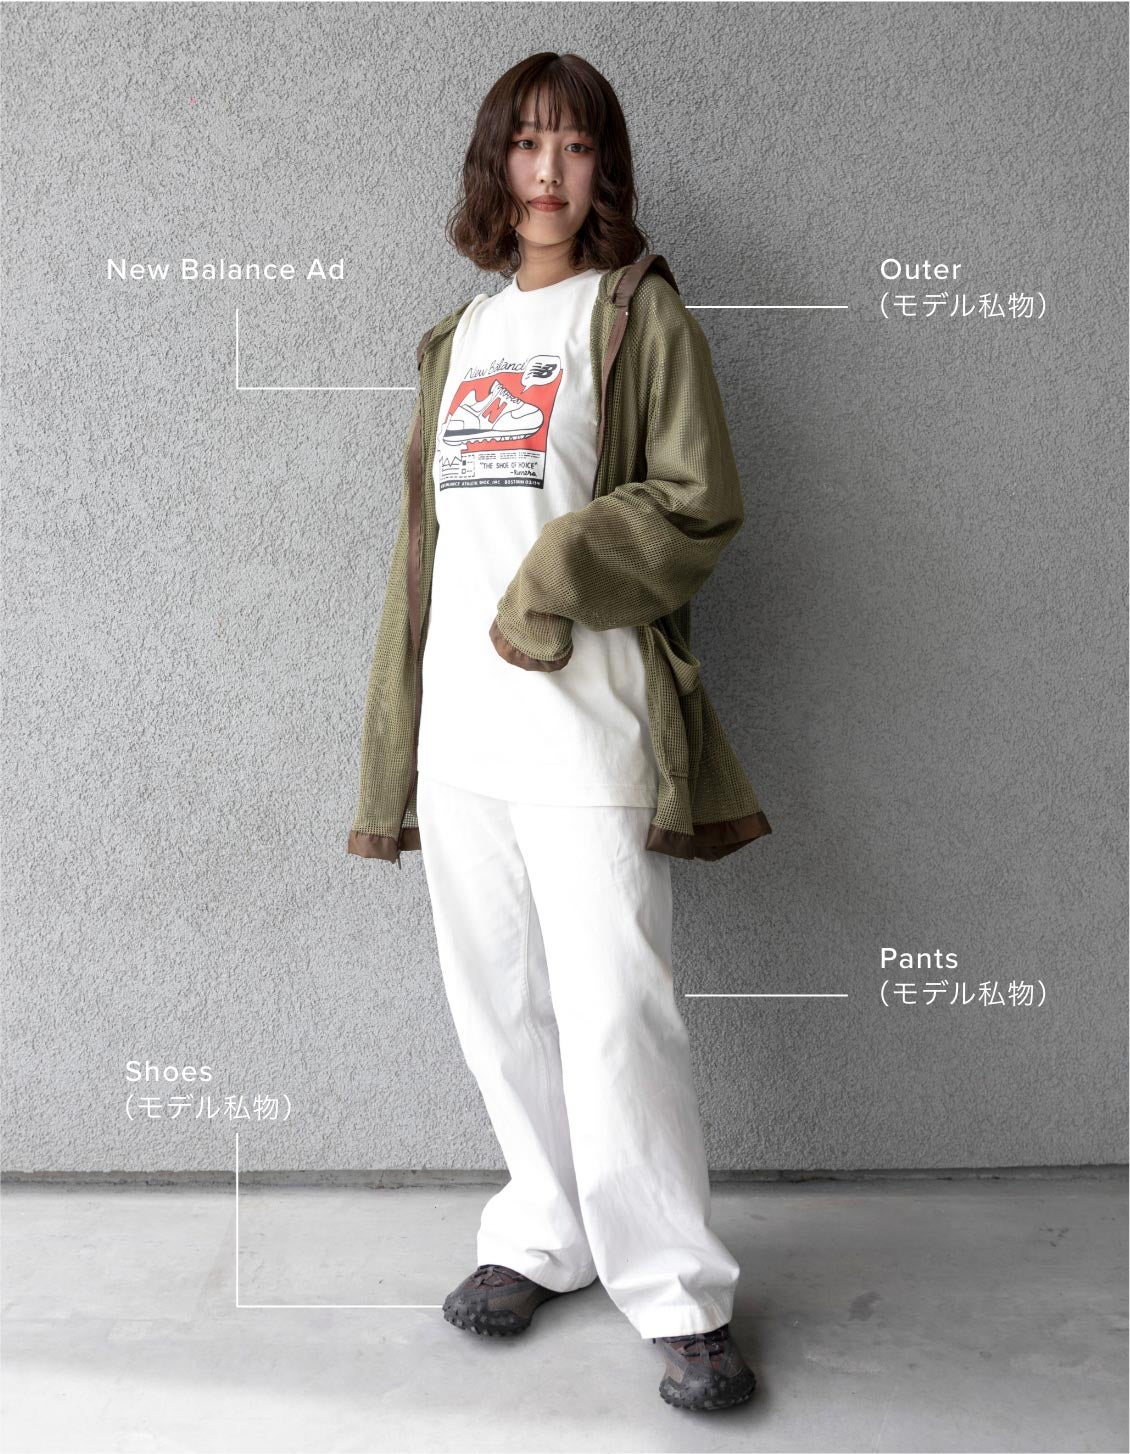 Kinu Natsume outfit details: T-shirt: New Balance Ad, Outerwear: Model's own, Pants: Model's own, Shoes: Model's own